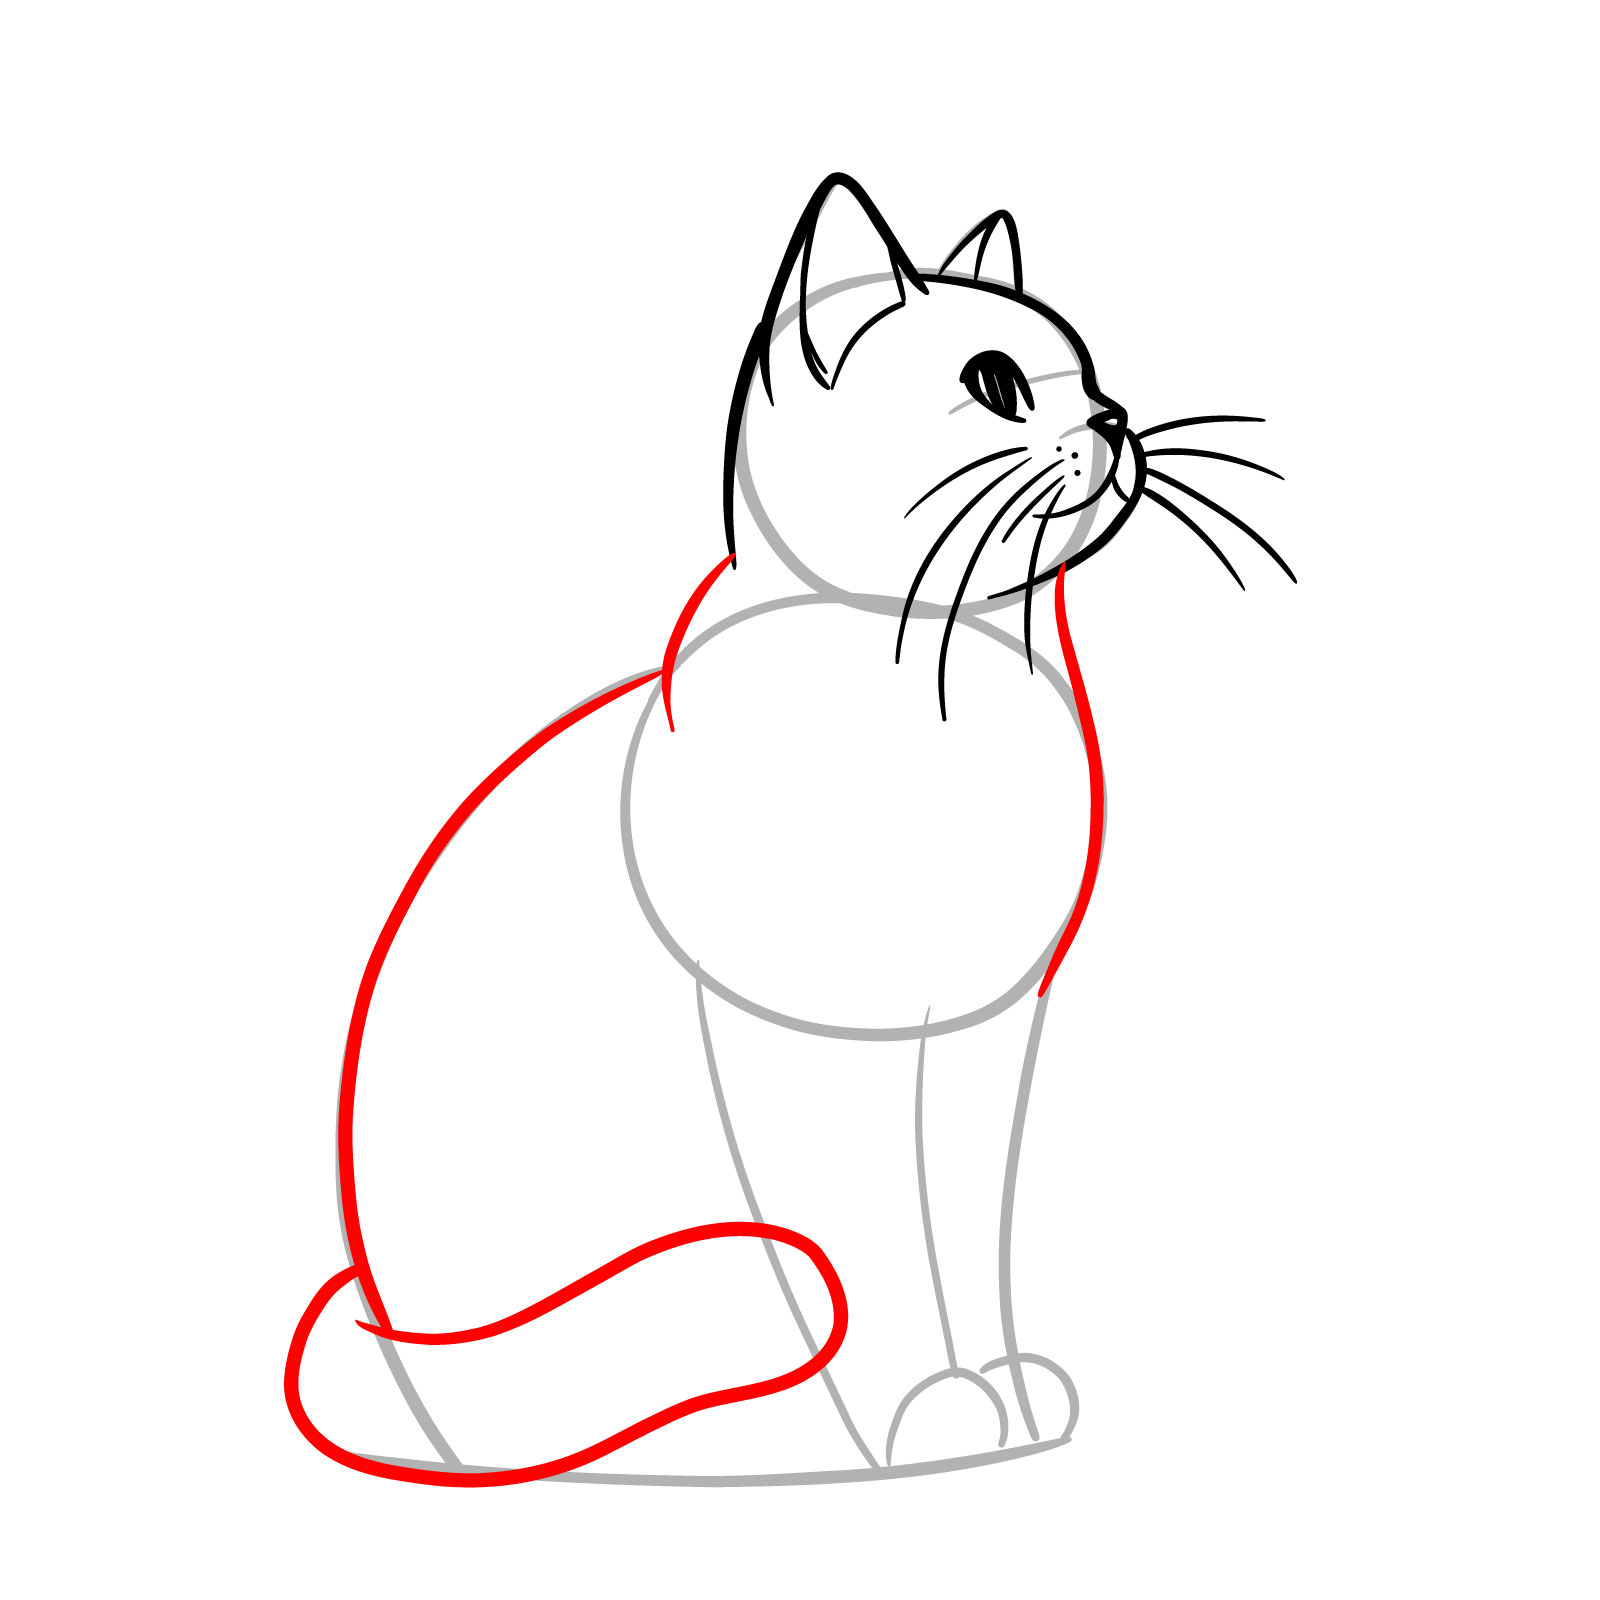 Outlining the cat's neck, upper body, back, and curving tail for a full body sketch - step 08